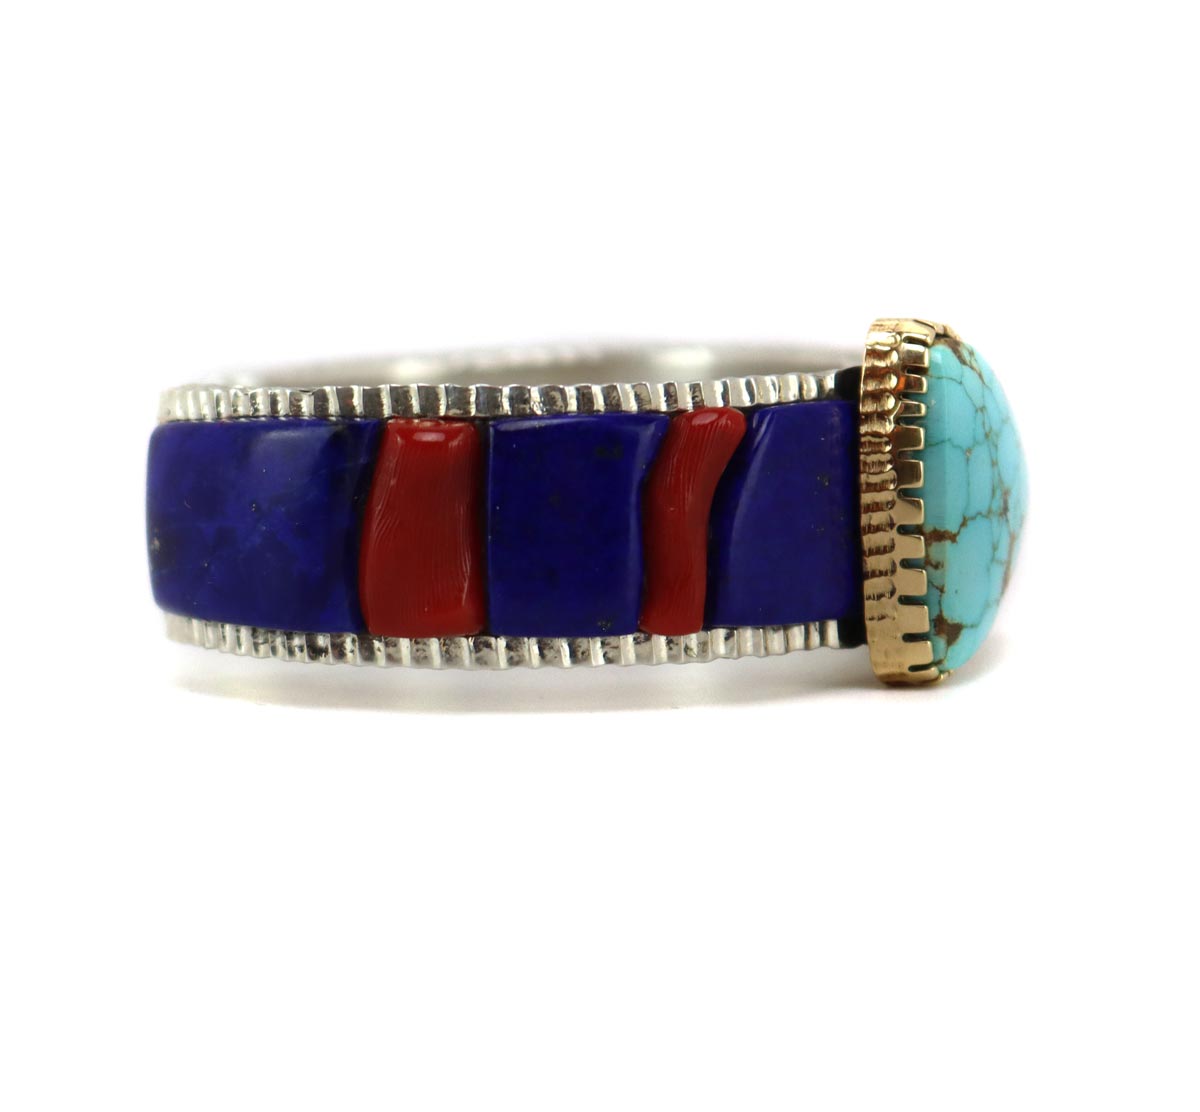 Alvin Yellowhorse (b. 1968) - Navajo Contemporary Multi-Stone Inlay and Silver Overlay Bracelet with 18K Gold Bezel, size 6.5